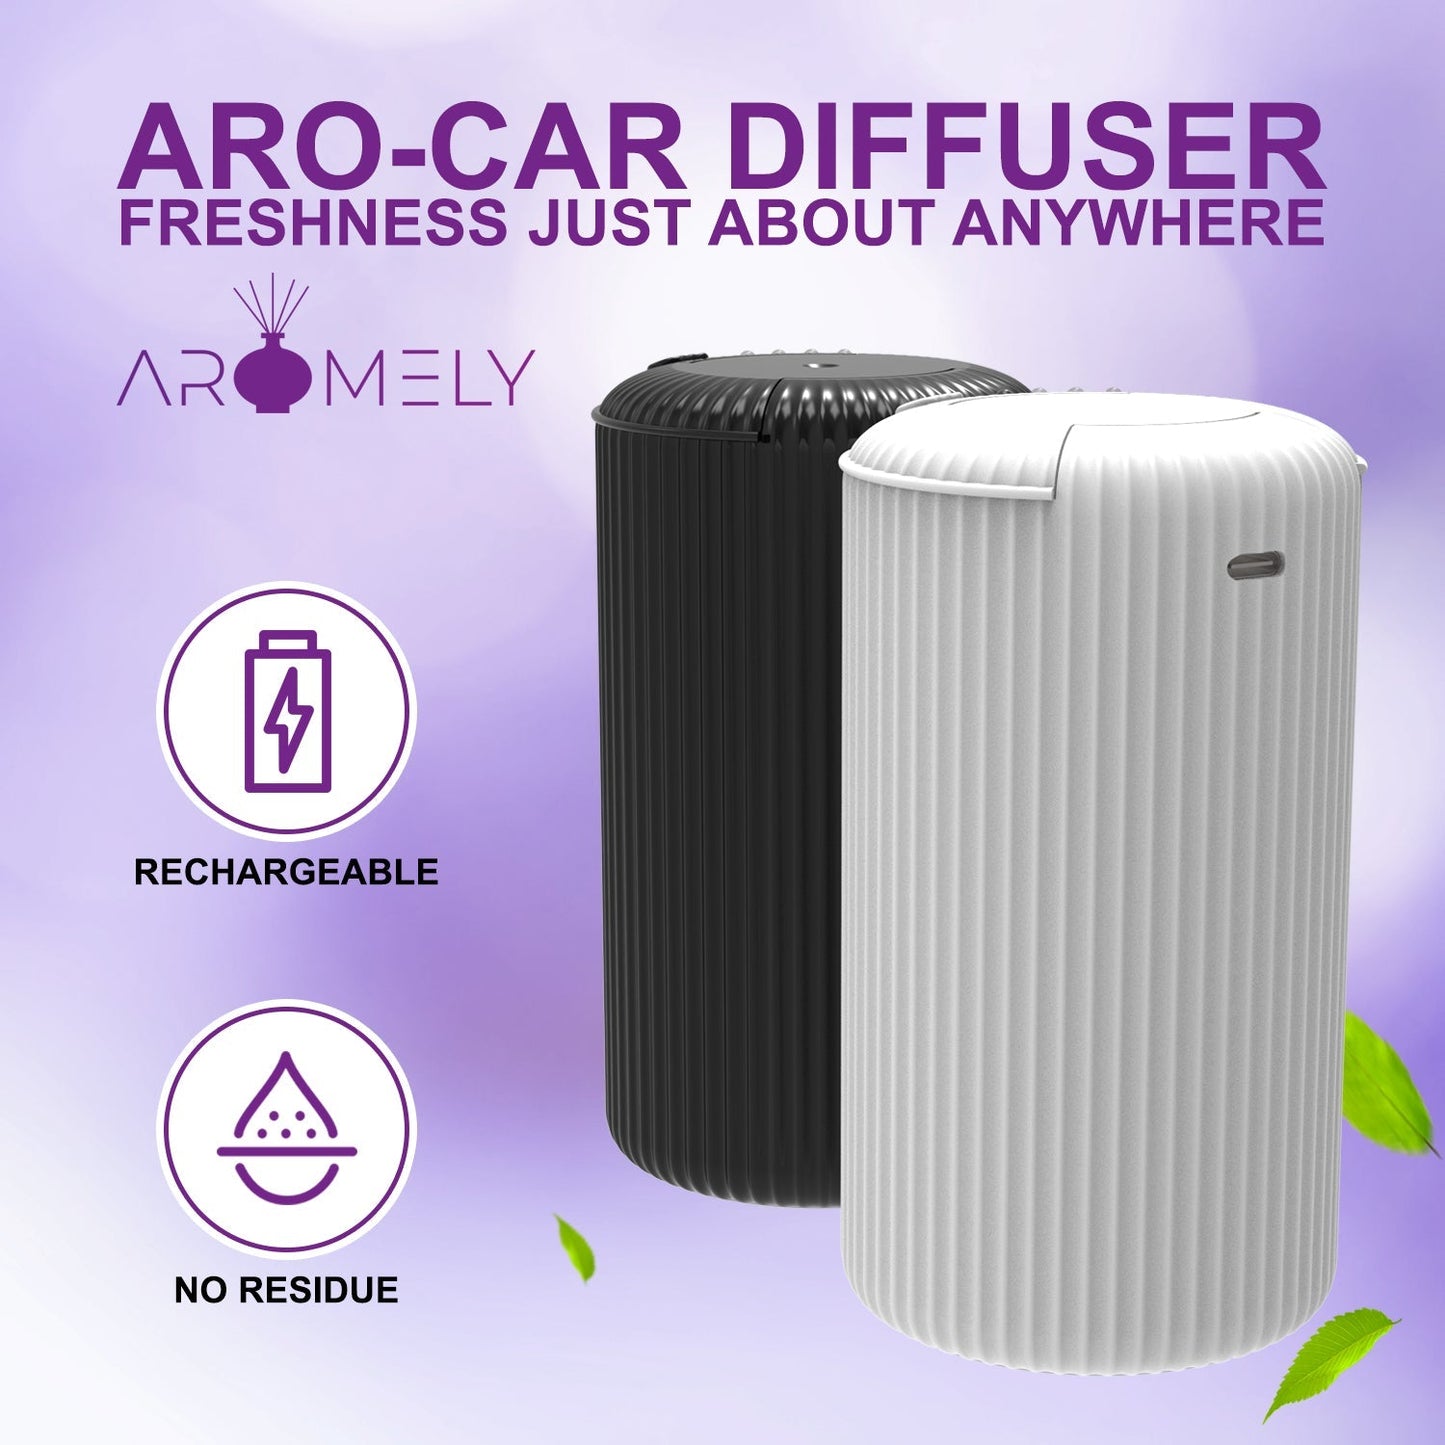 ARO-CAR by Aromely - Bringing your favorite fragrances anywhere